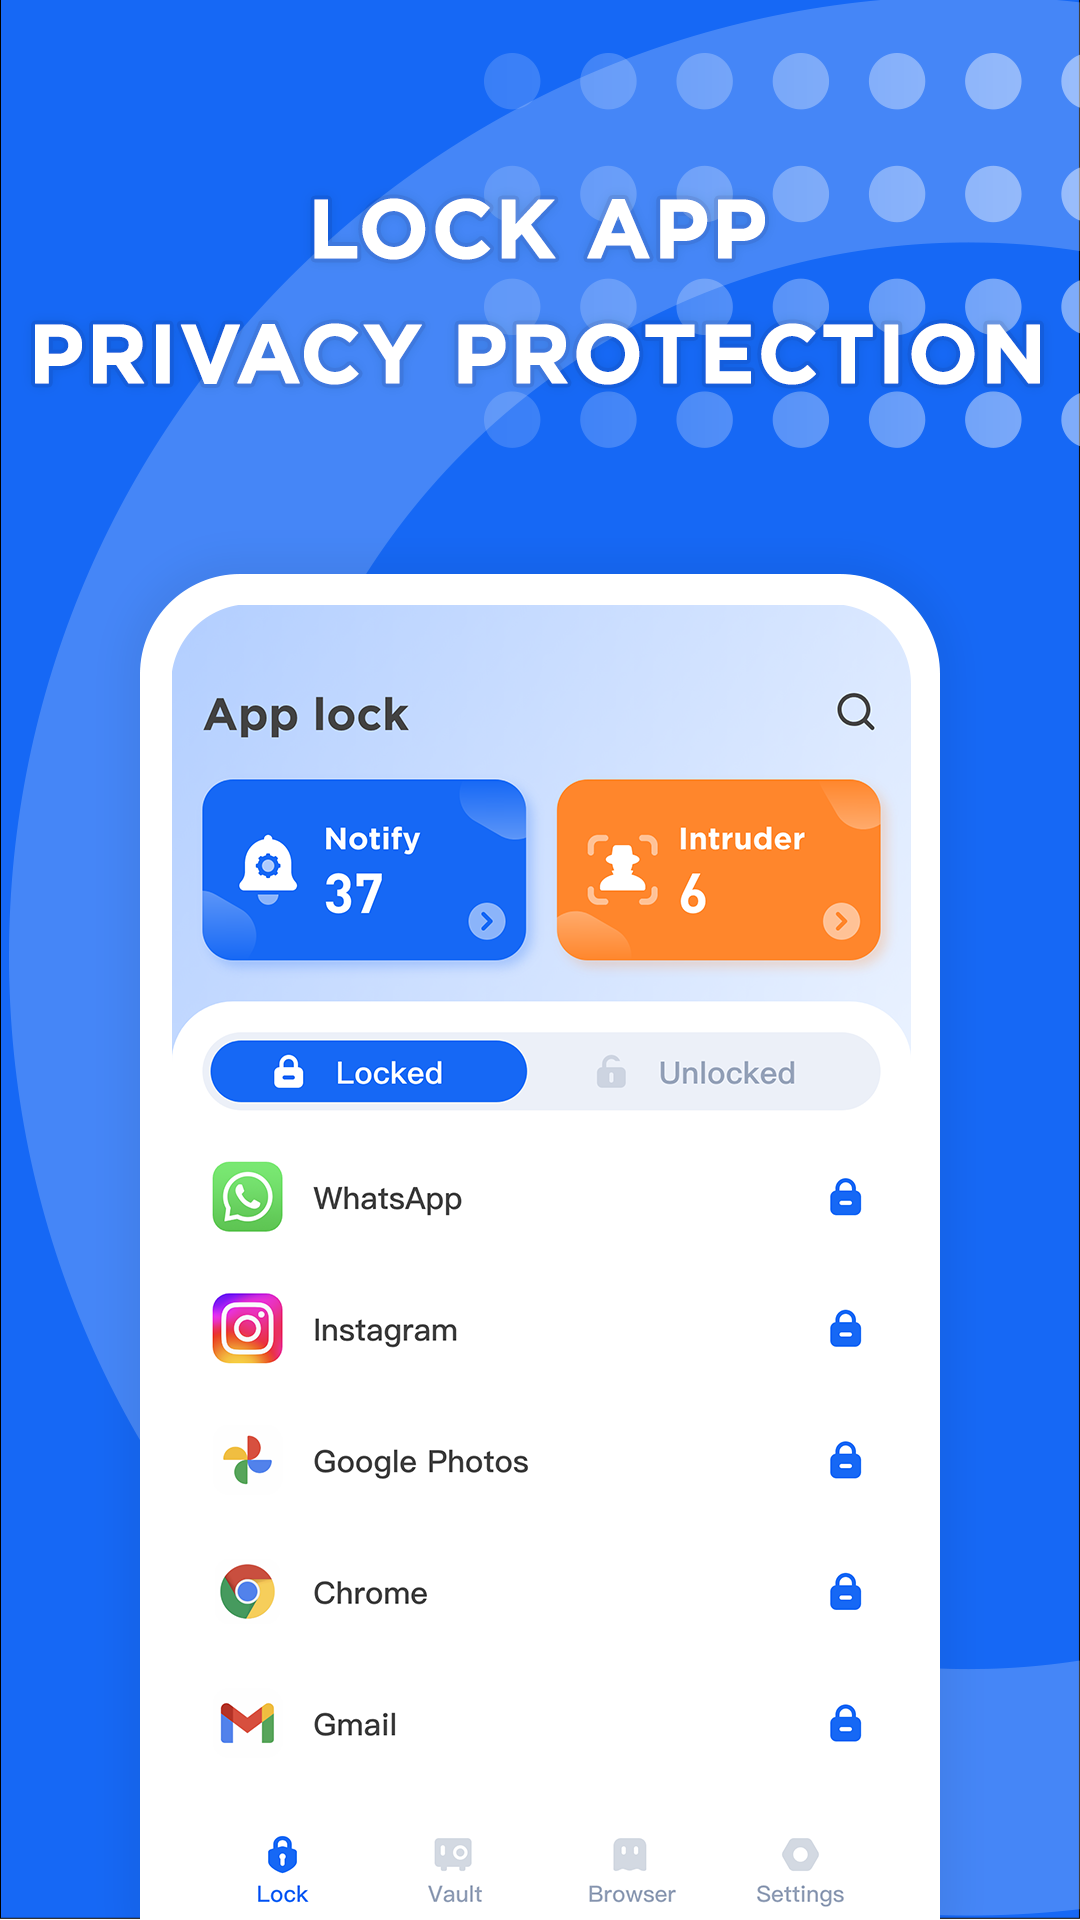 Locker for Roblox APK (Android App) - Free Download